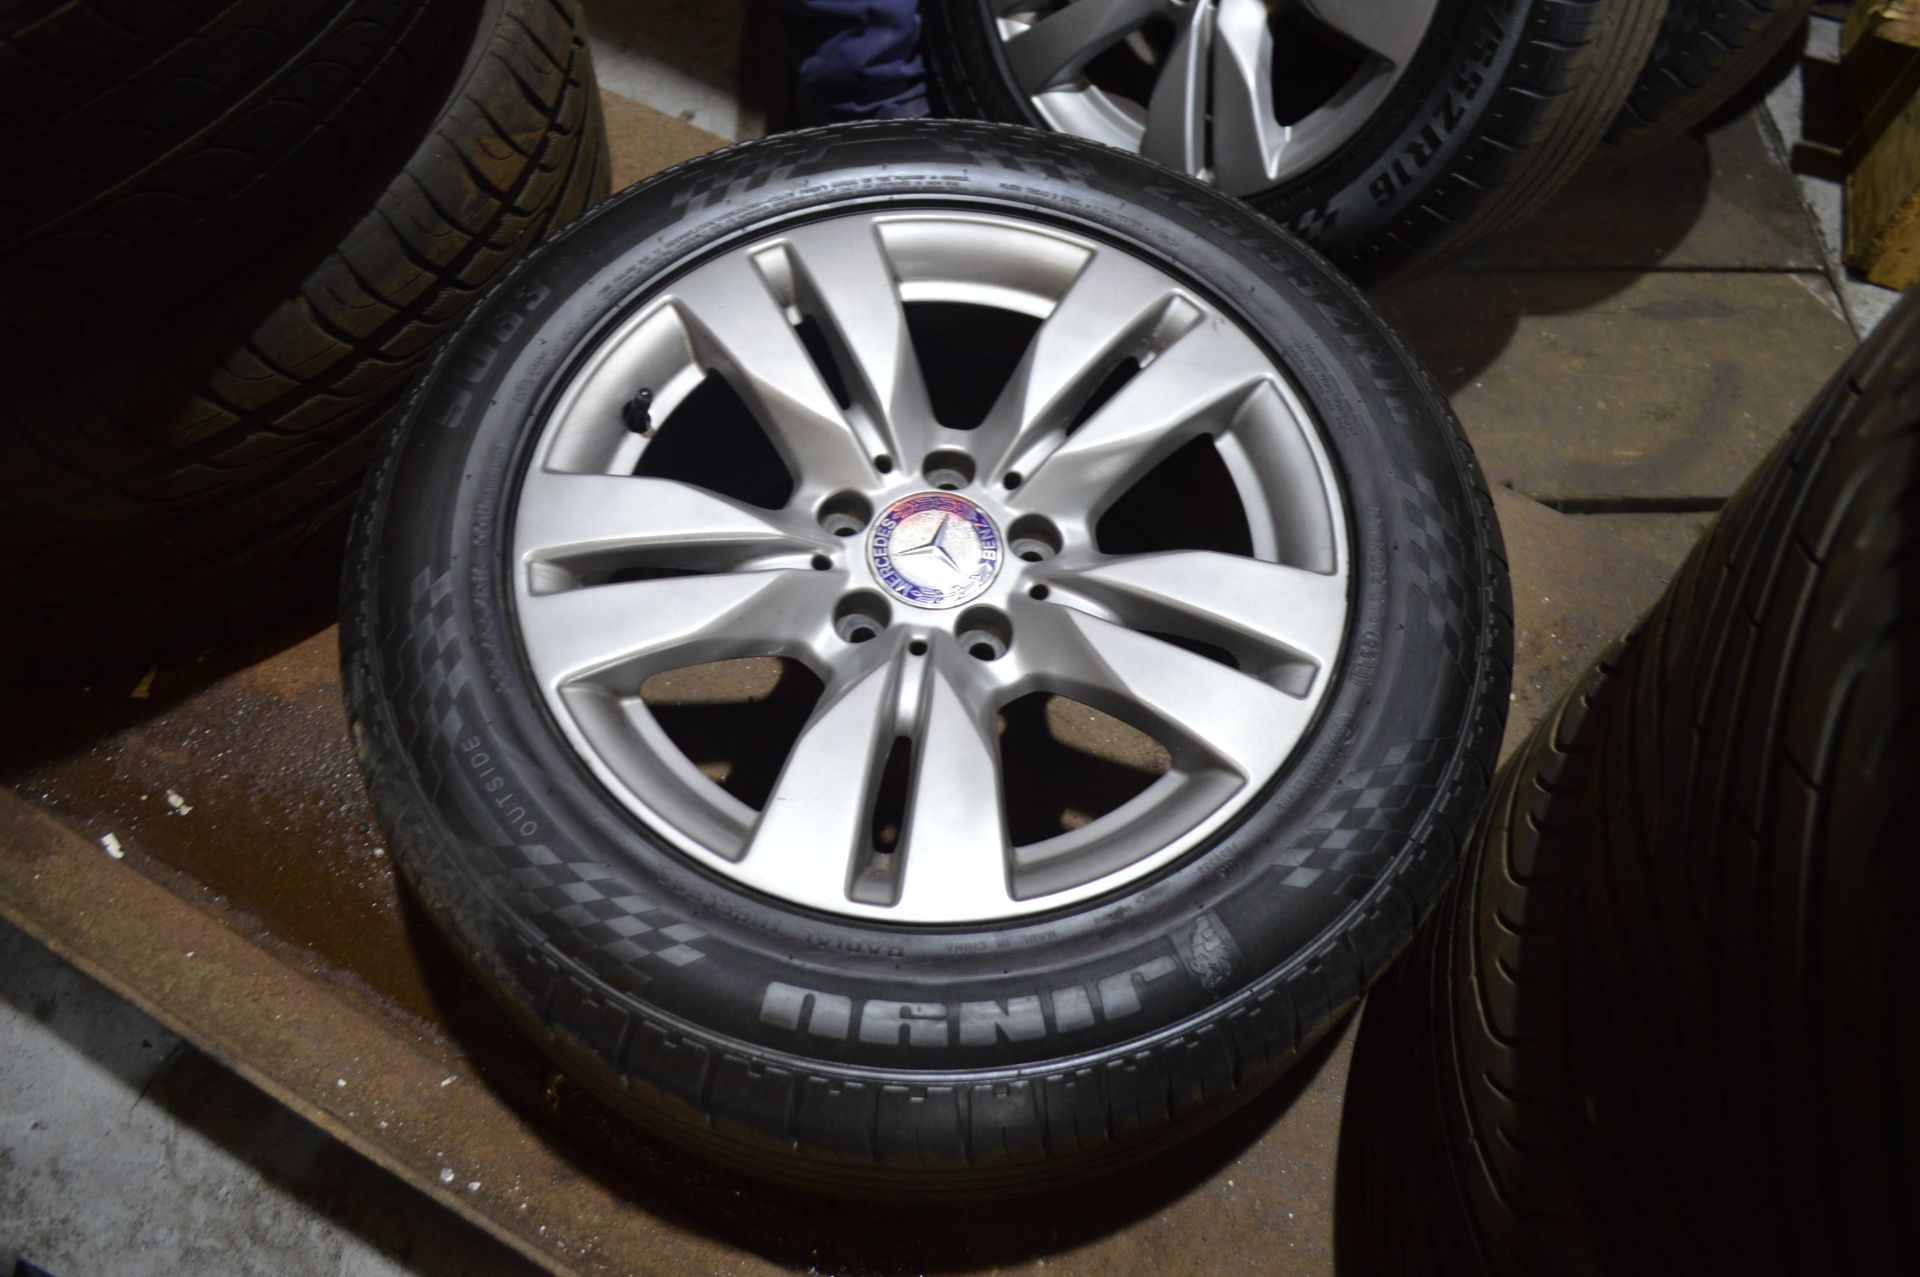 16" MERCEDES-BENZ ALLOY WHEELS - REMOVED FROM 2012 MERCEDES E CLASS *NO VAT* - Image 3 of 6